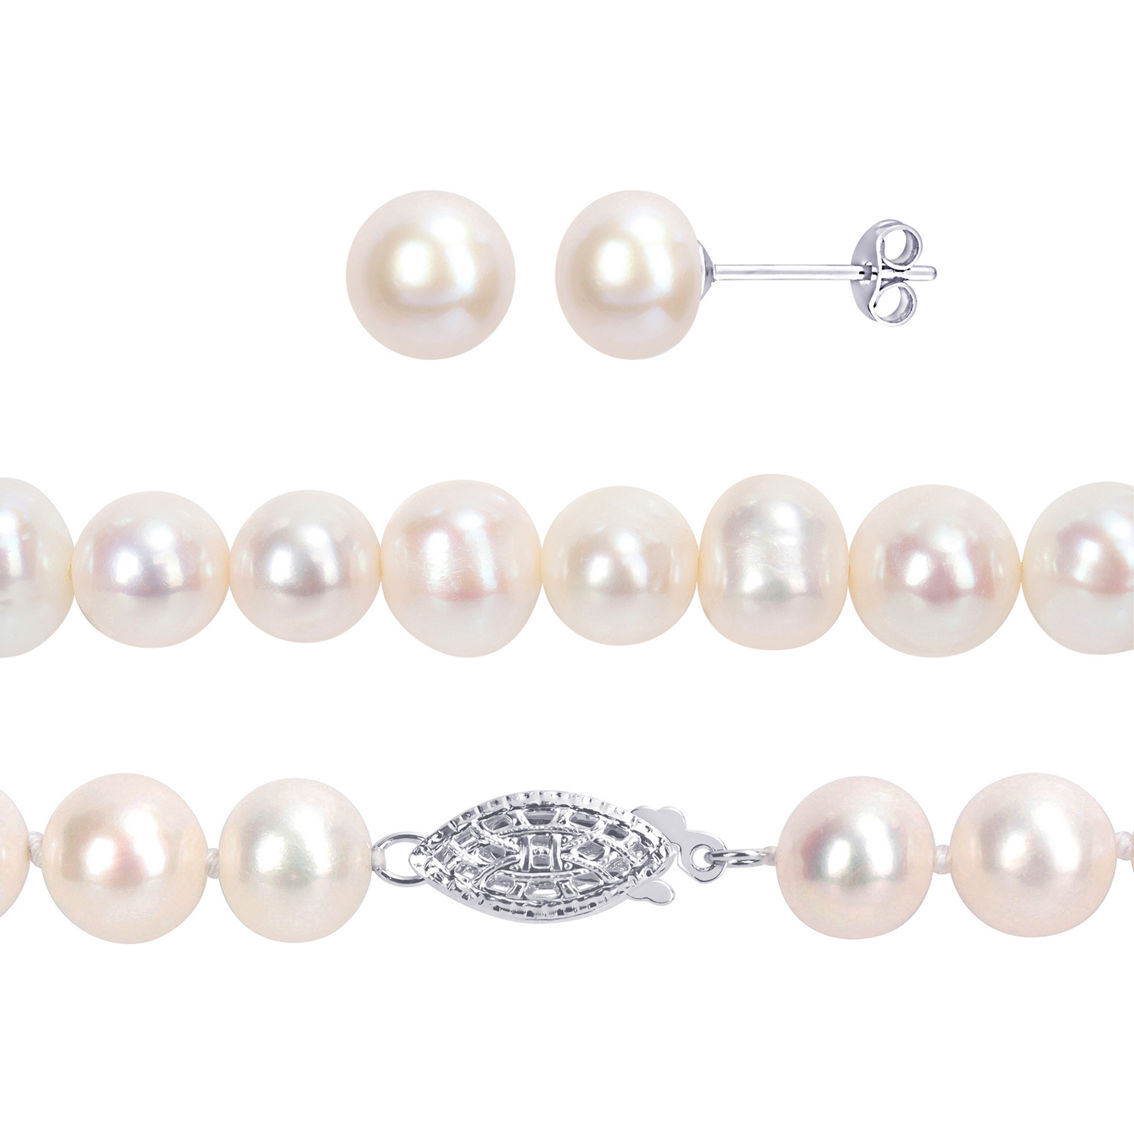 Sofia B. Cultured Pearl 3 pc. Set Necklace Earrings & Bracelet in Sterling Silver - Image 3 of 6